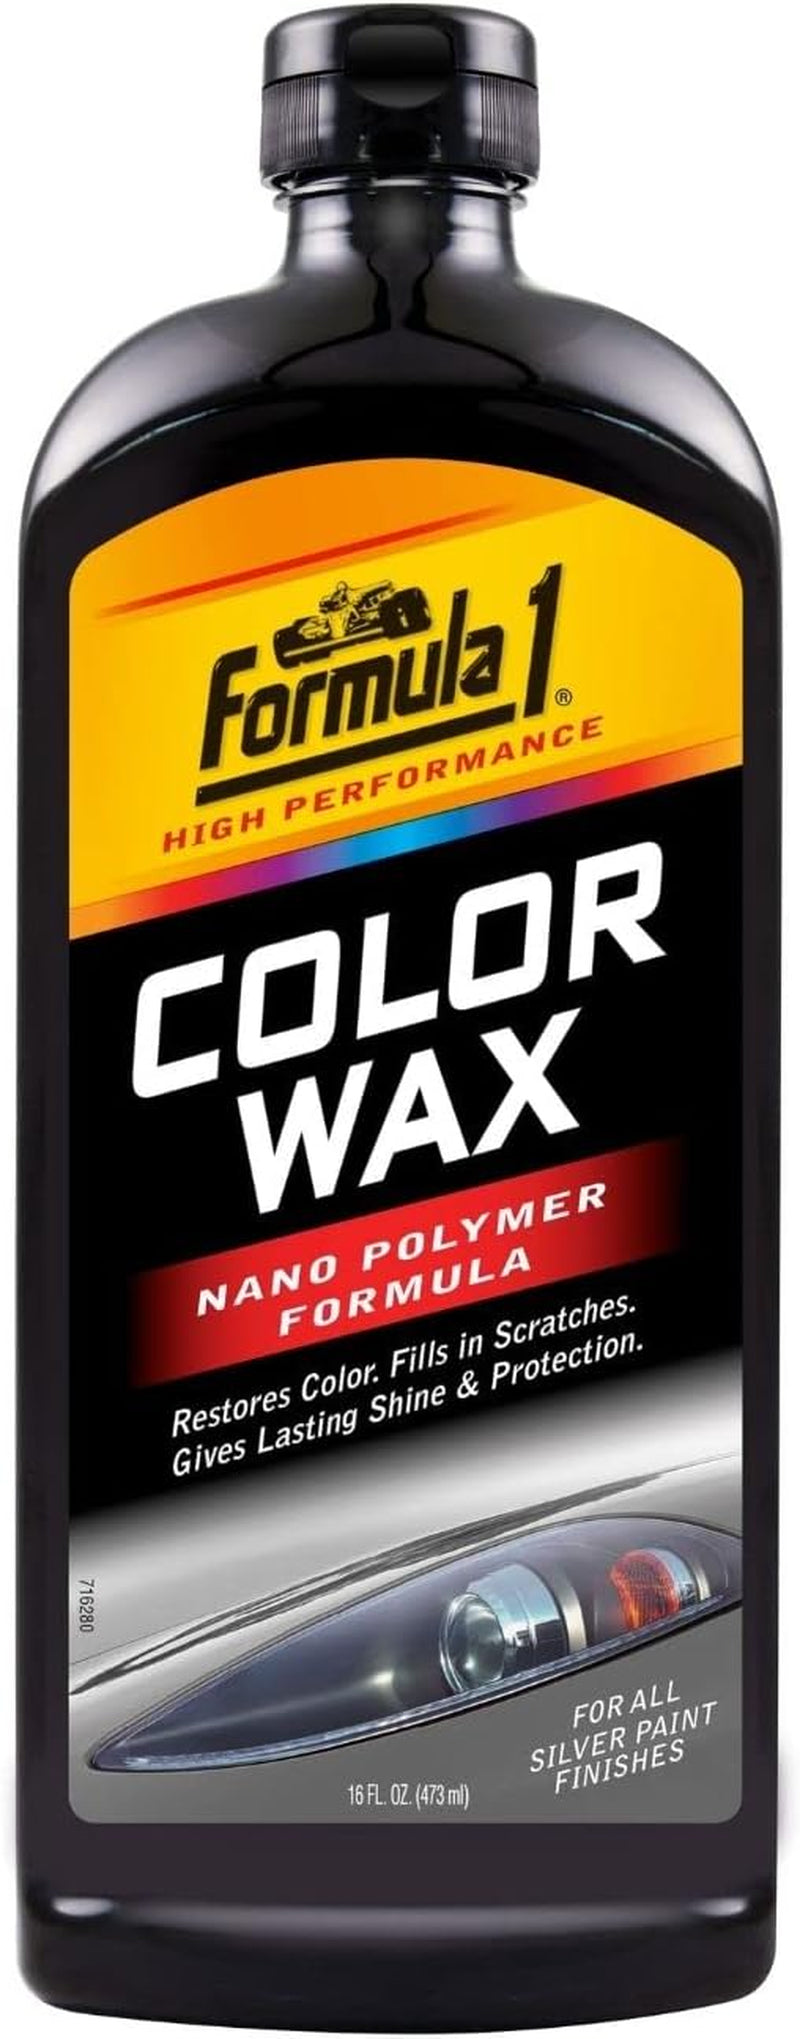 Formula 1 White Color Car Wax to Erase Car Scratches & Swirls, Restore & Protect White Colored Cars, UV-Stable Pigment Car Detailing Wax w/Polishing Compound Car Cleaning Supplies, 16 oz